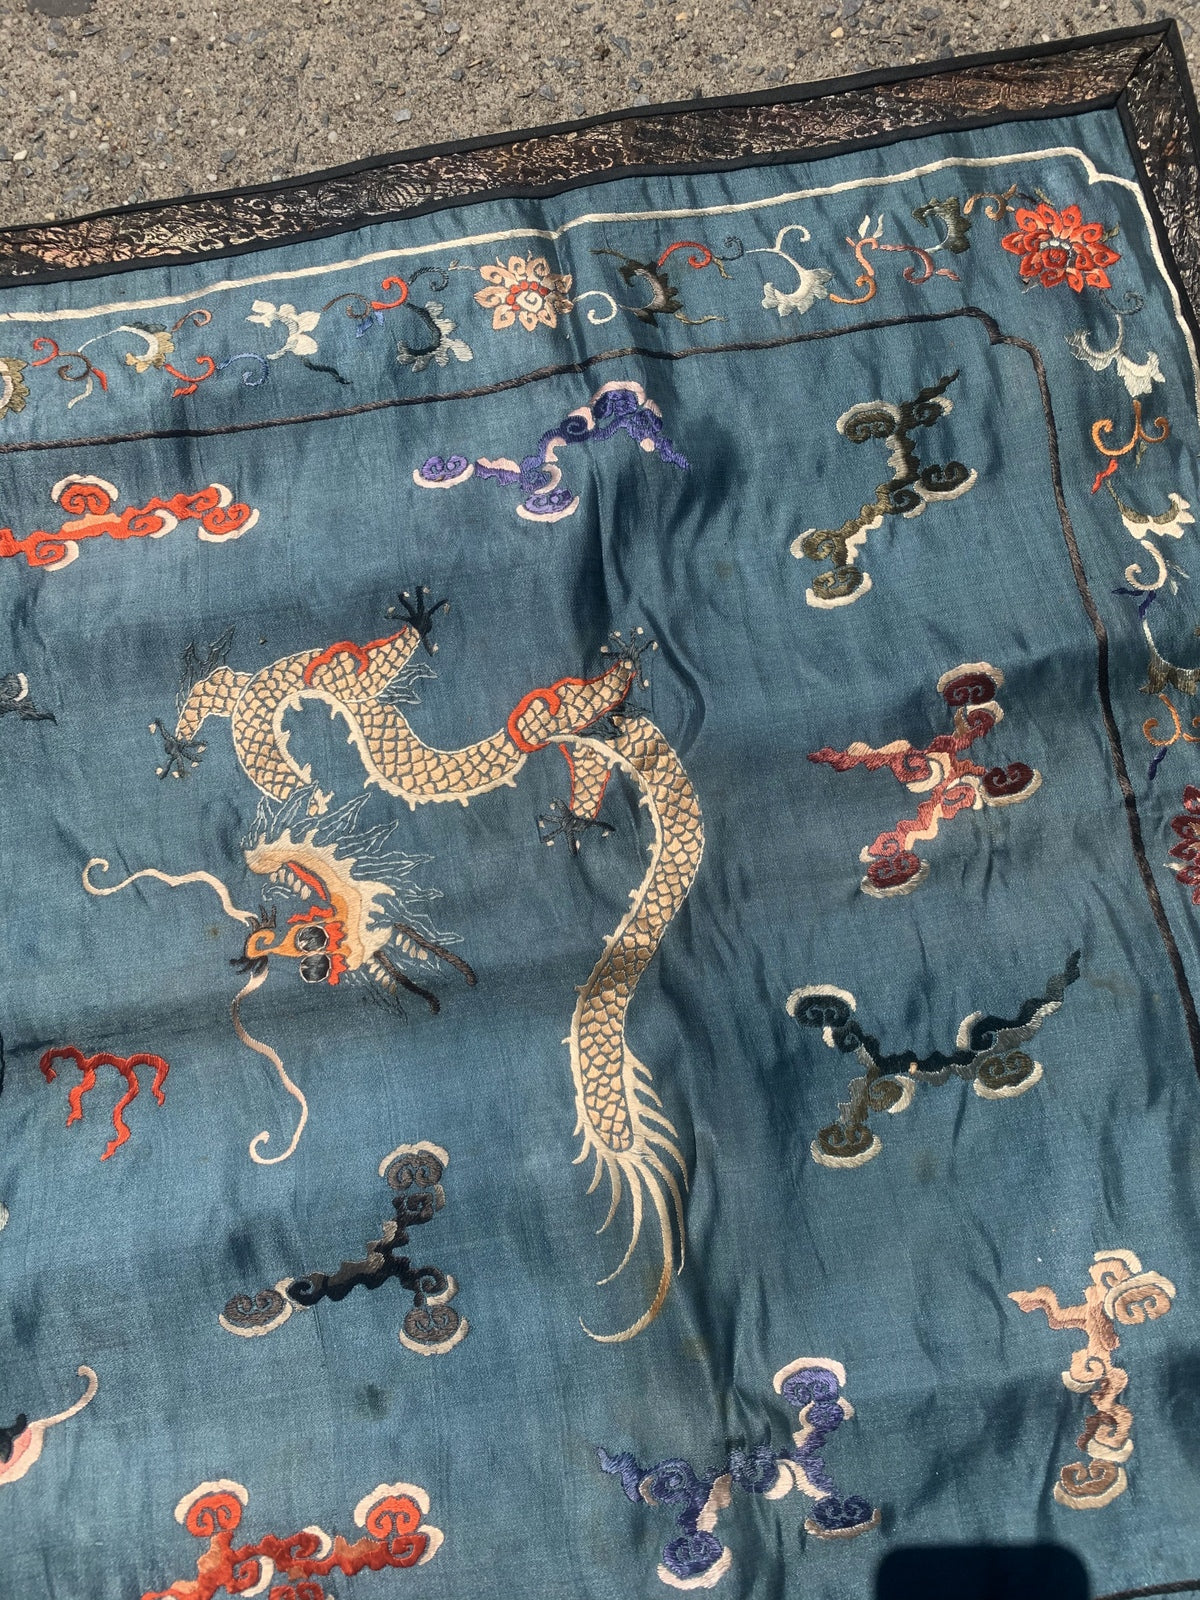 Handmade antique Chinese collectible silk textile 1870s